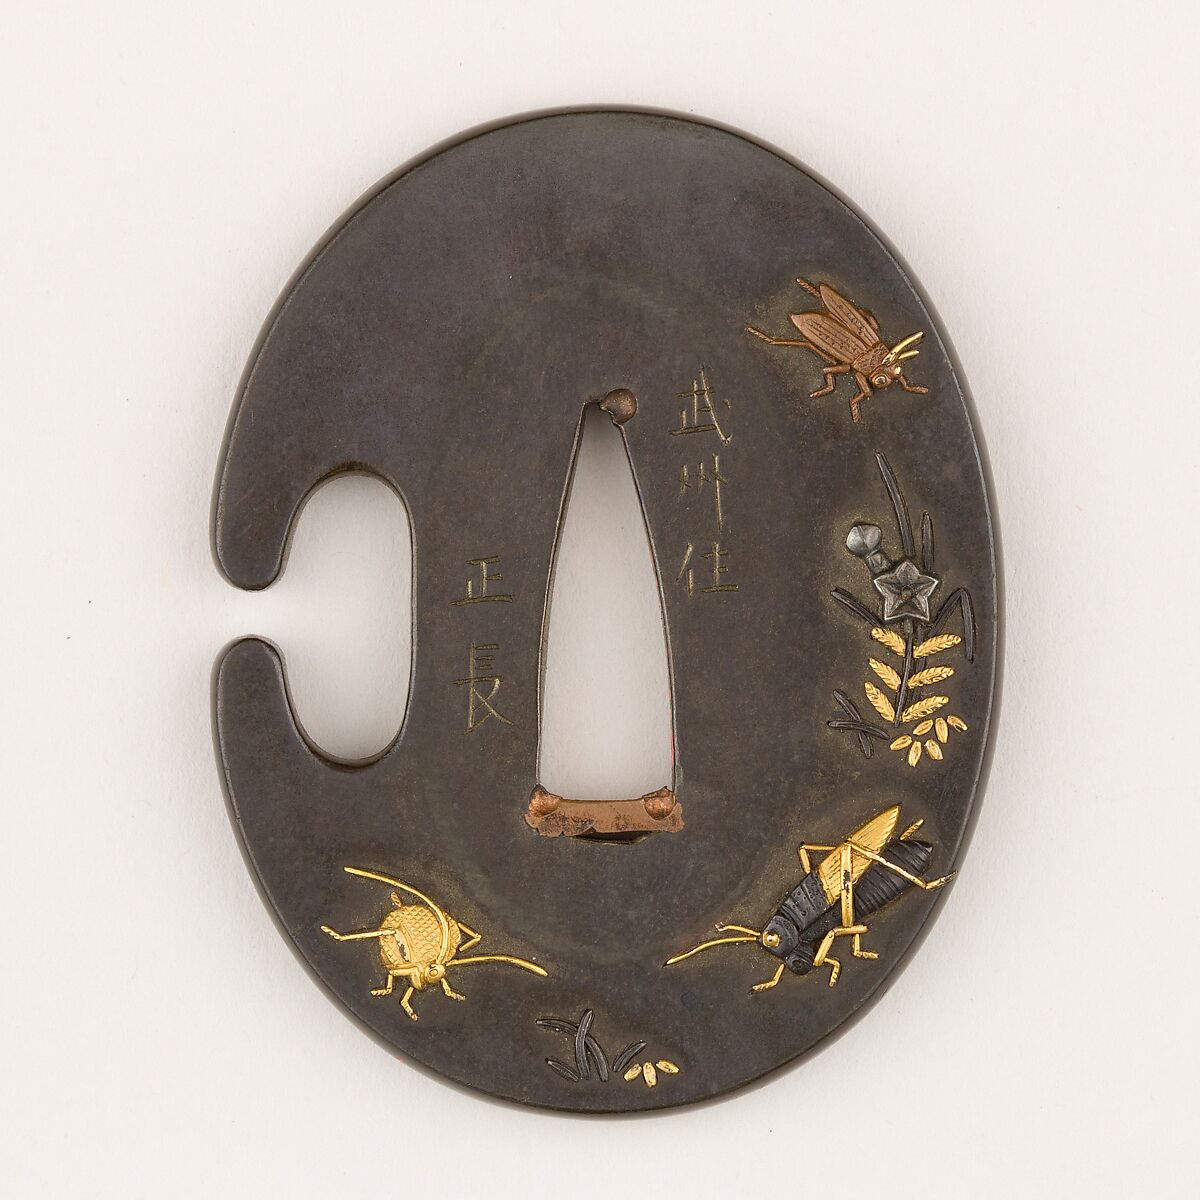 Sword Guard (Tsuba) With the Motif of Insects and Autumnal 